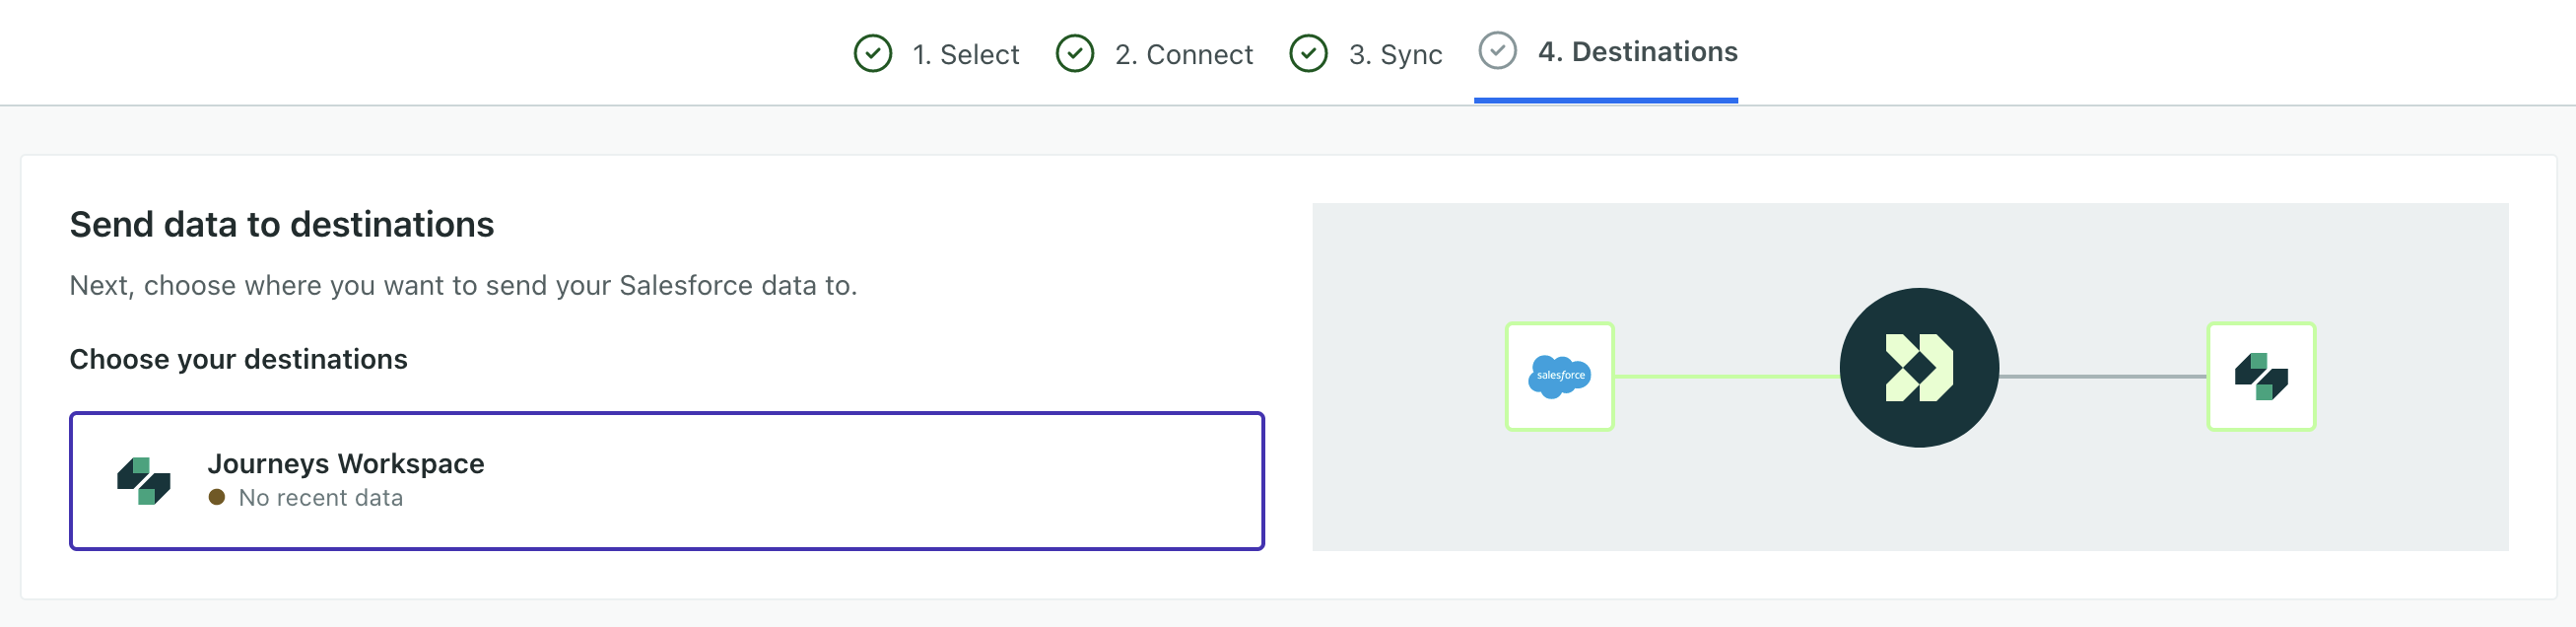 Select the destinations you want to connect to your salesforce source